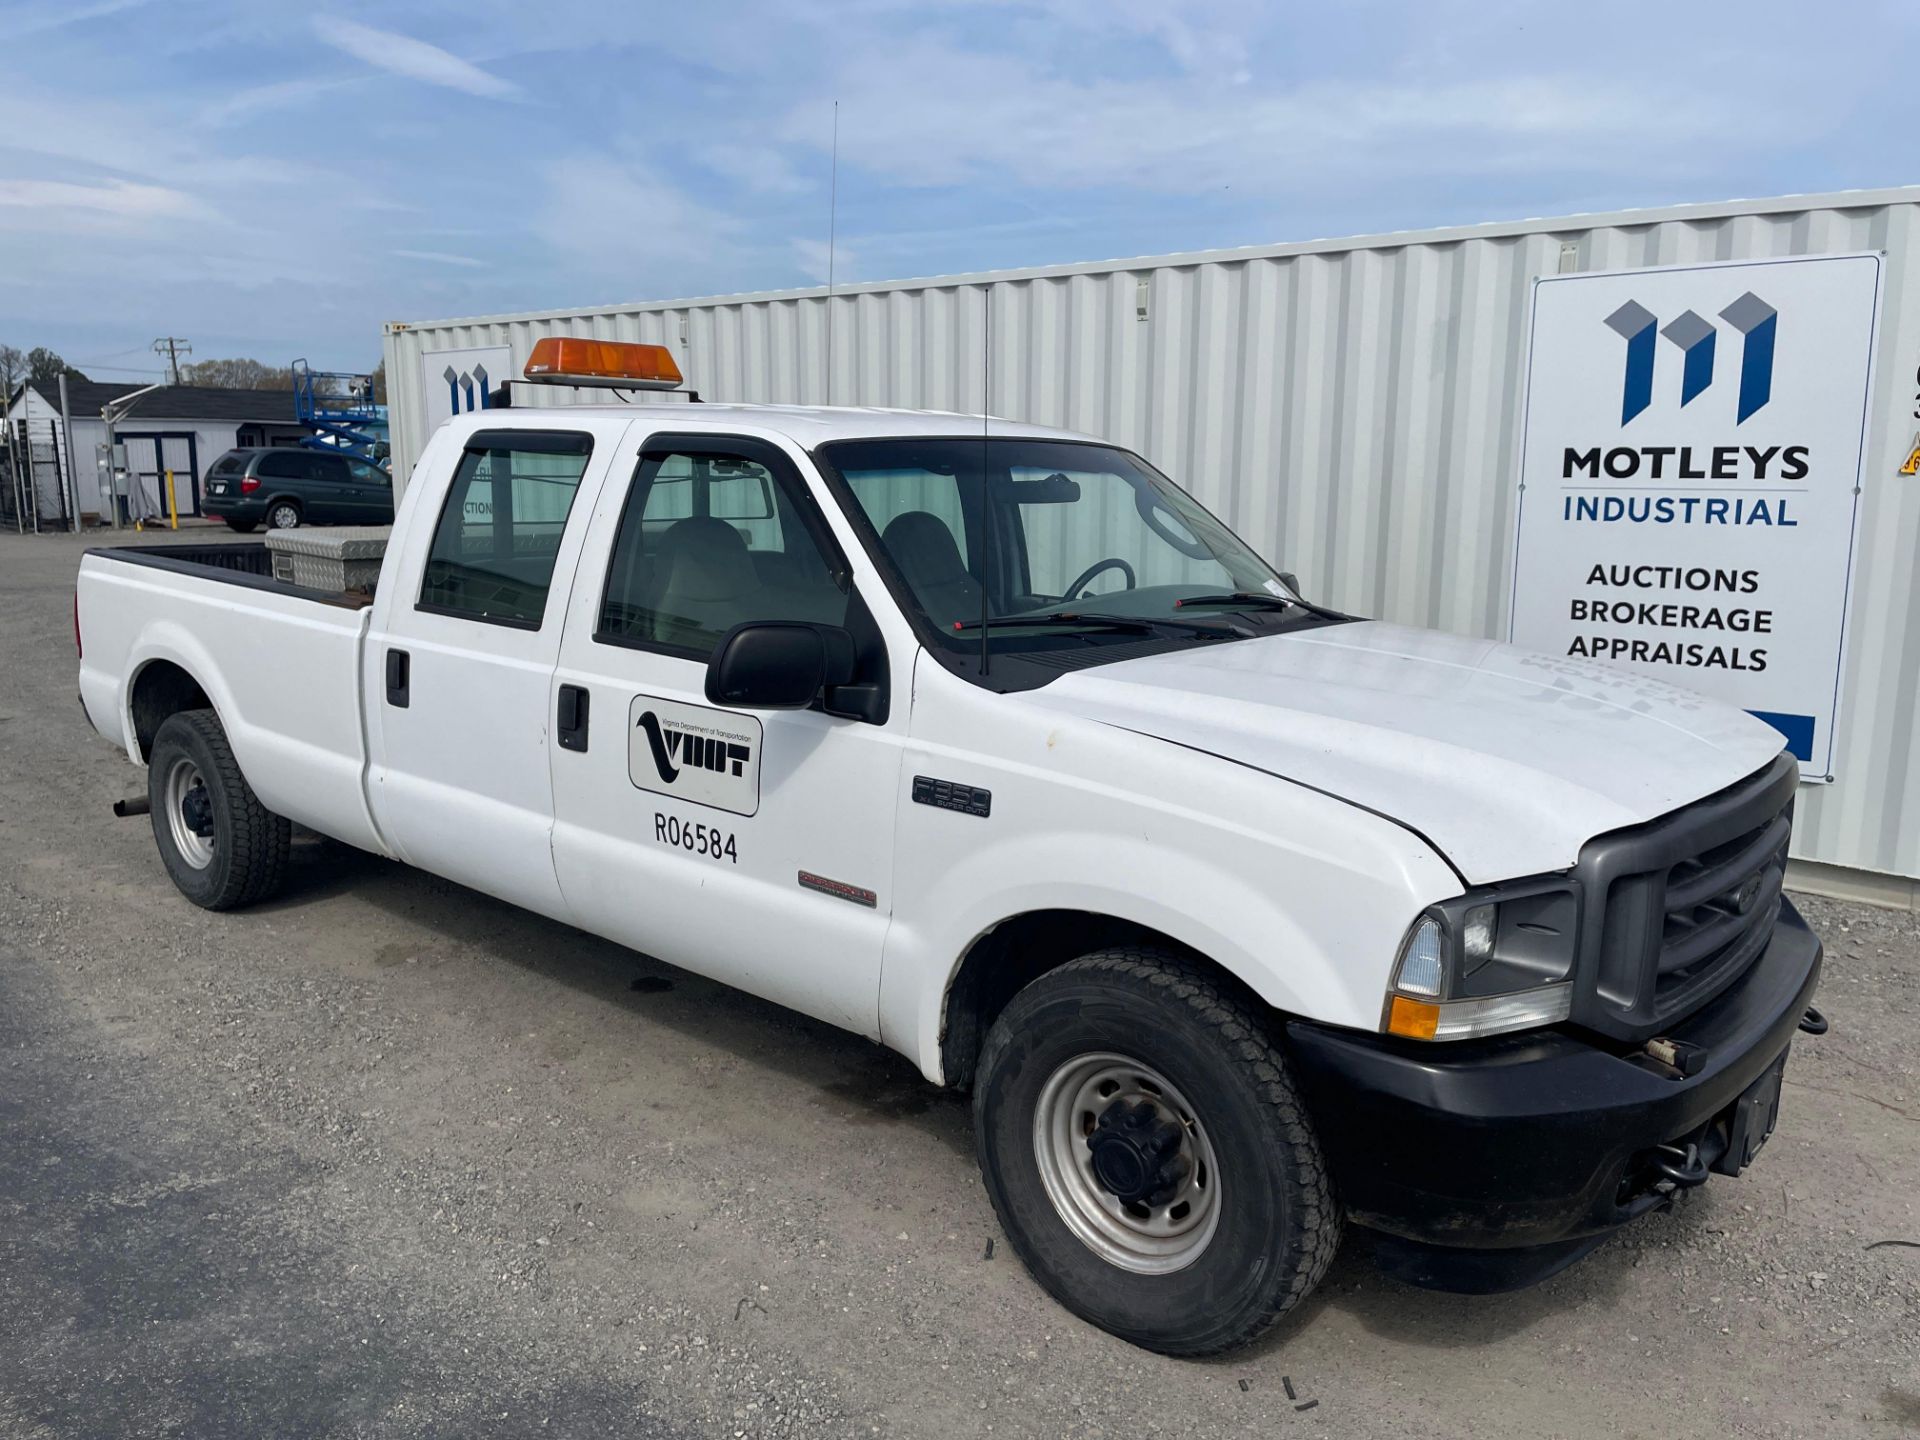 2003 Ford F350 Crew Cab Pick up Truck